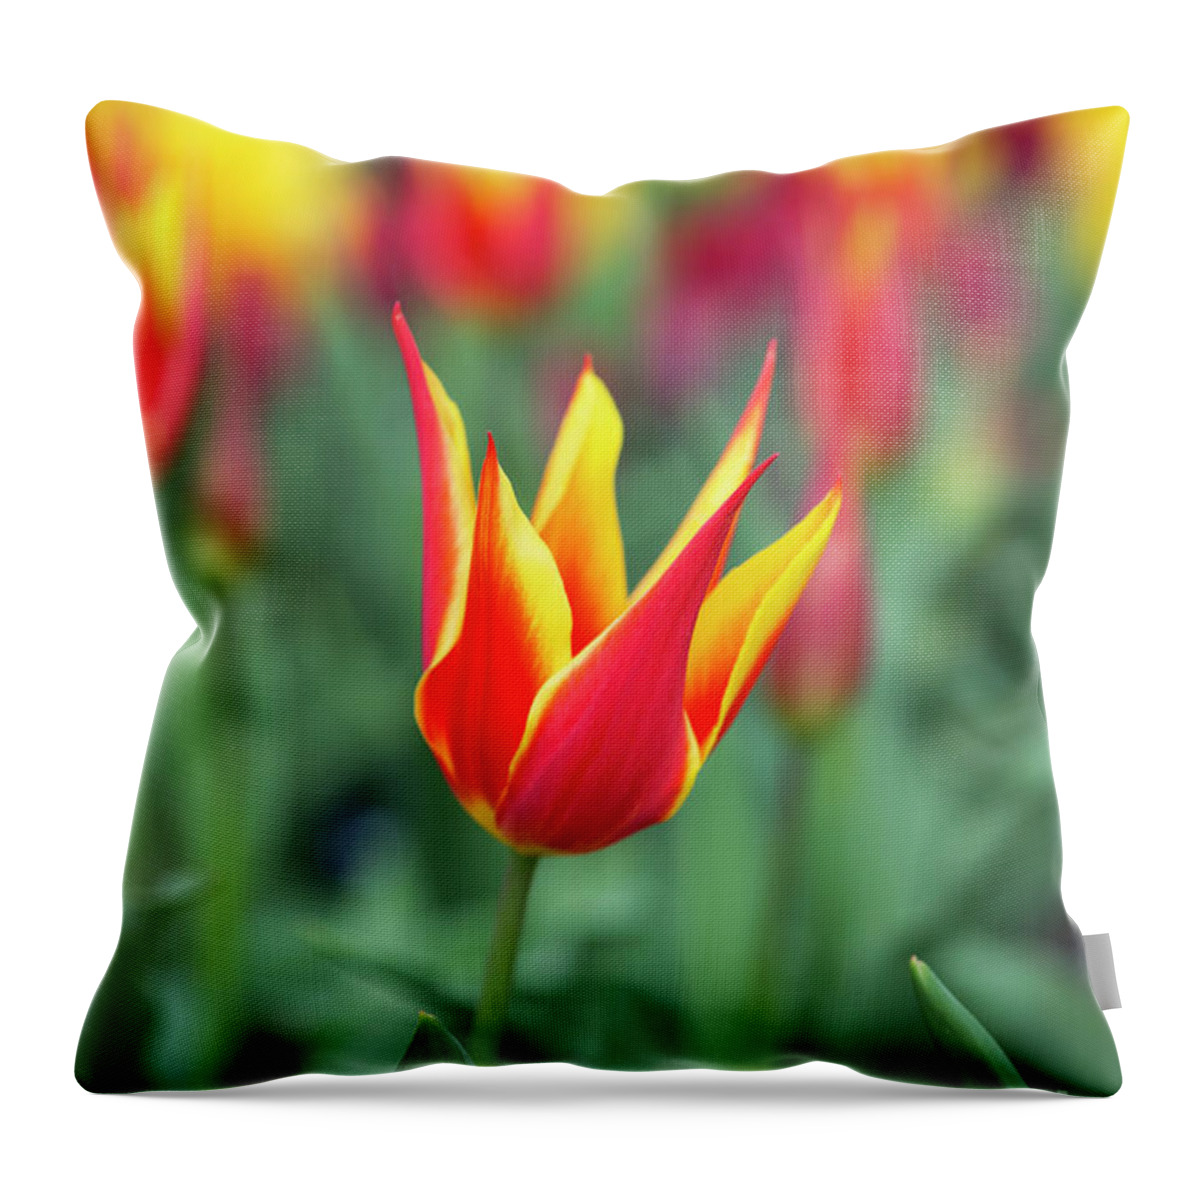 Tulip Fly Away Throw Pillow featuring the photograph Tulip Fly Away by Tim Gainey